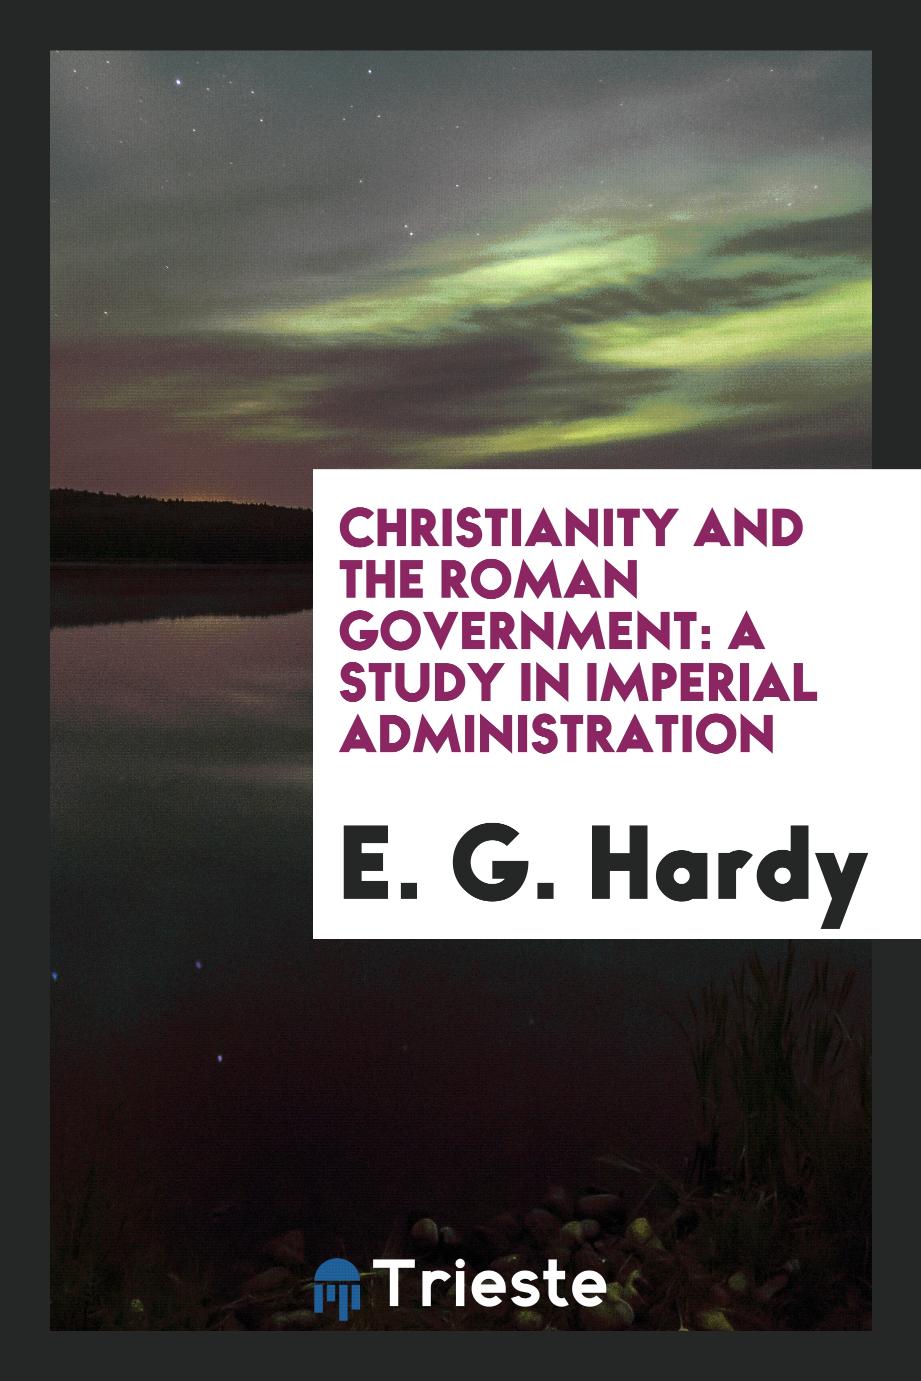 Christianity and the Roman government: a study in imperial administration